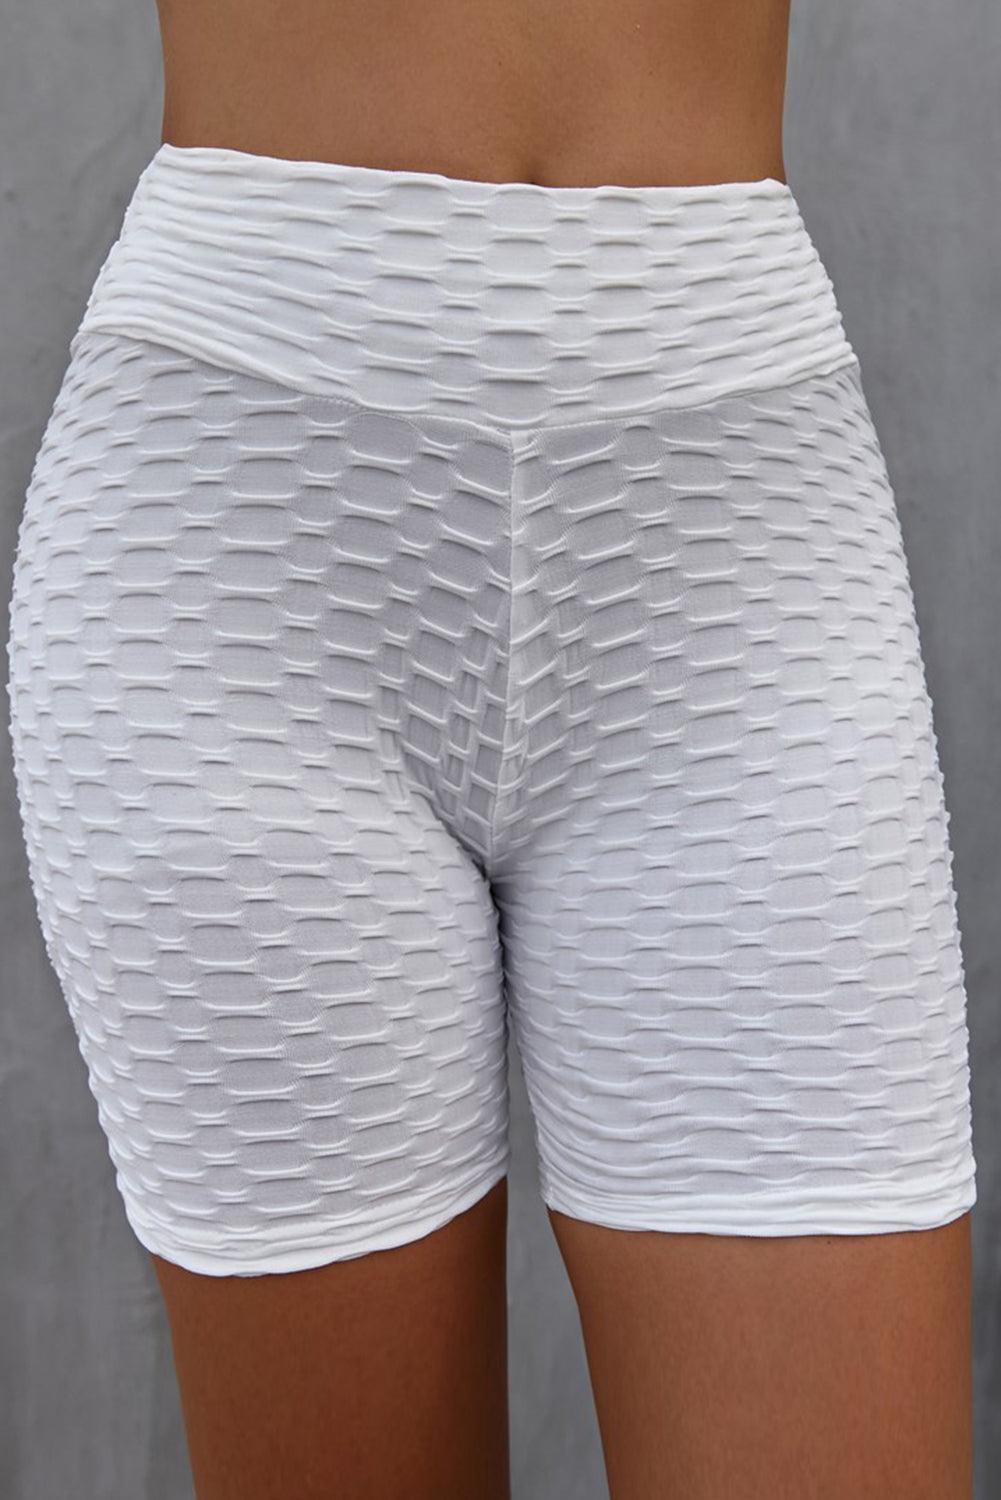 a close up of a person wearing white shorts